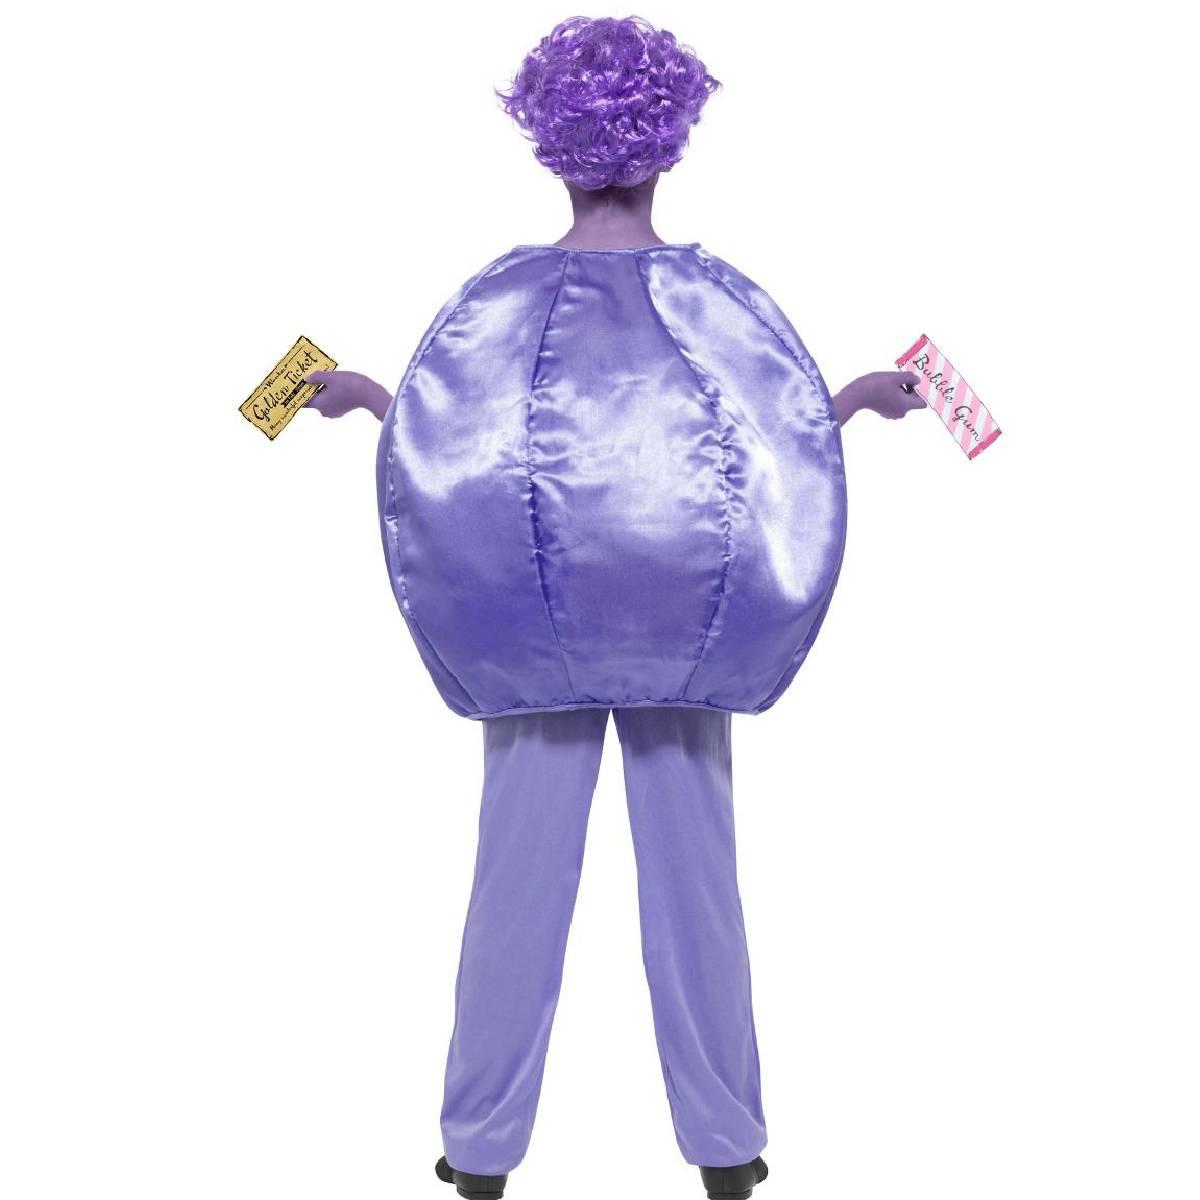 Back view of our fully licensed Roald Dahl Violet Beauregarde Fancy Dress Costume for Girls by Smiffys 41542 available here at Karnival Costumes online party shop